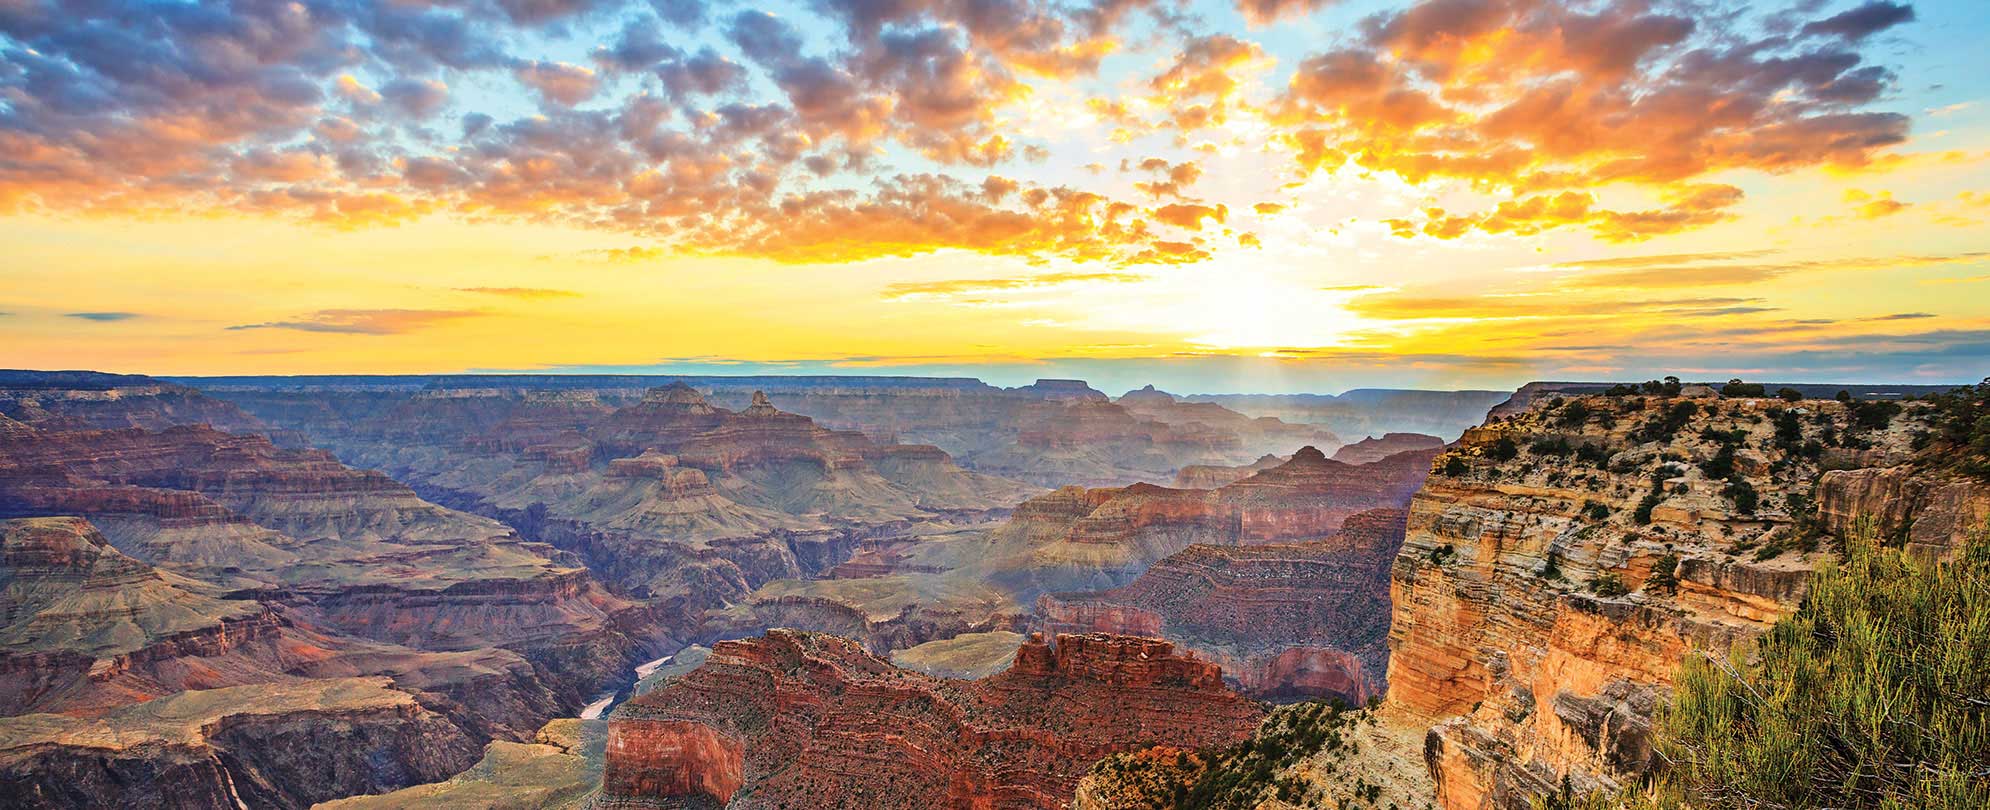 A view of the Grand Canyon National Park at sunset.